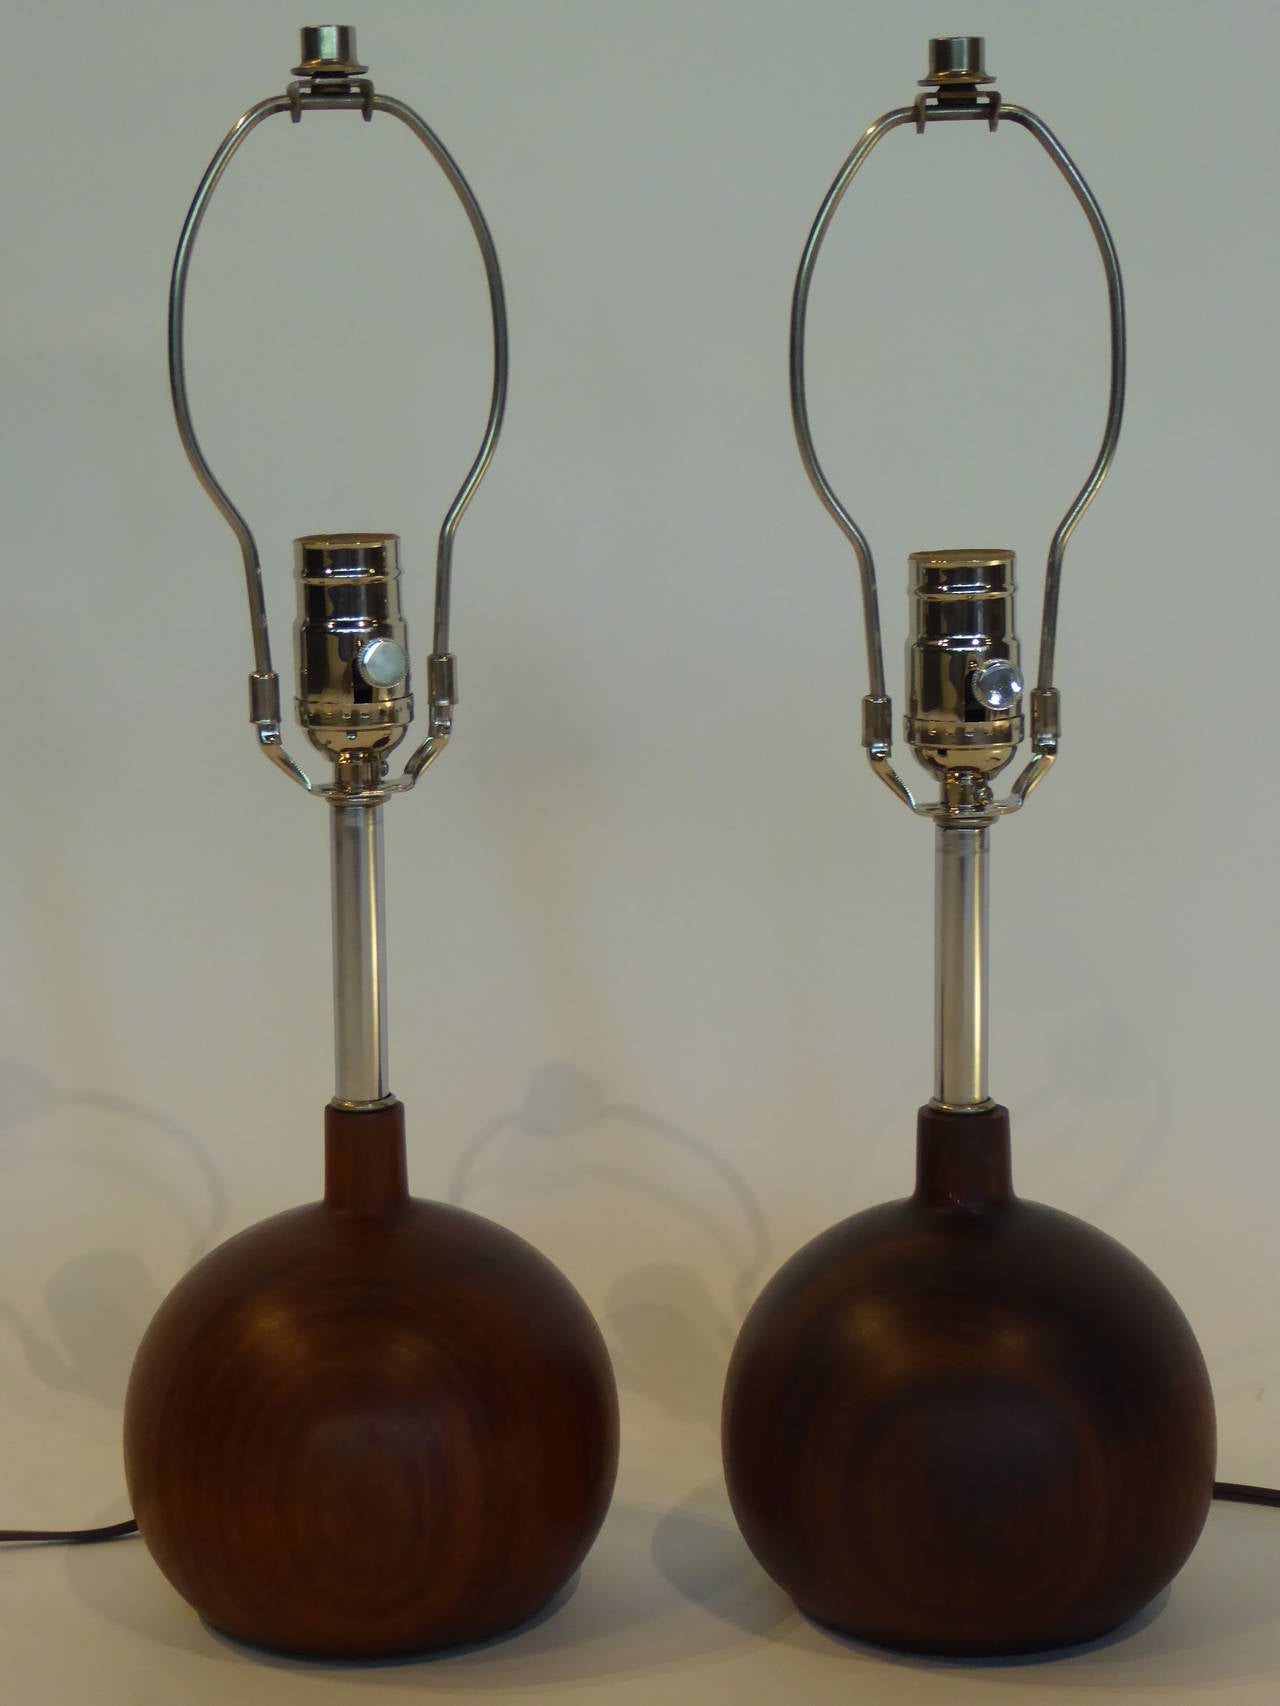 Lathe turned Brazilian rosewood orbs define this pair of petite Danish, 1960s table lamps with chrome necks. Beautifully figured, they have been rewired and have new chrome UL three level sockets. Just add your shades!

Measurements;  5.5